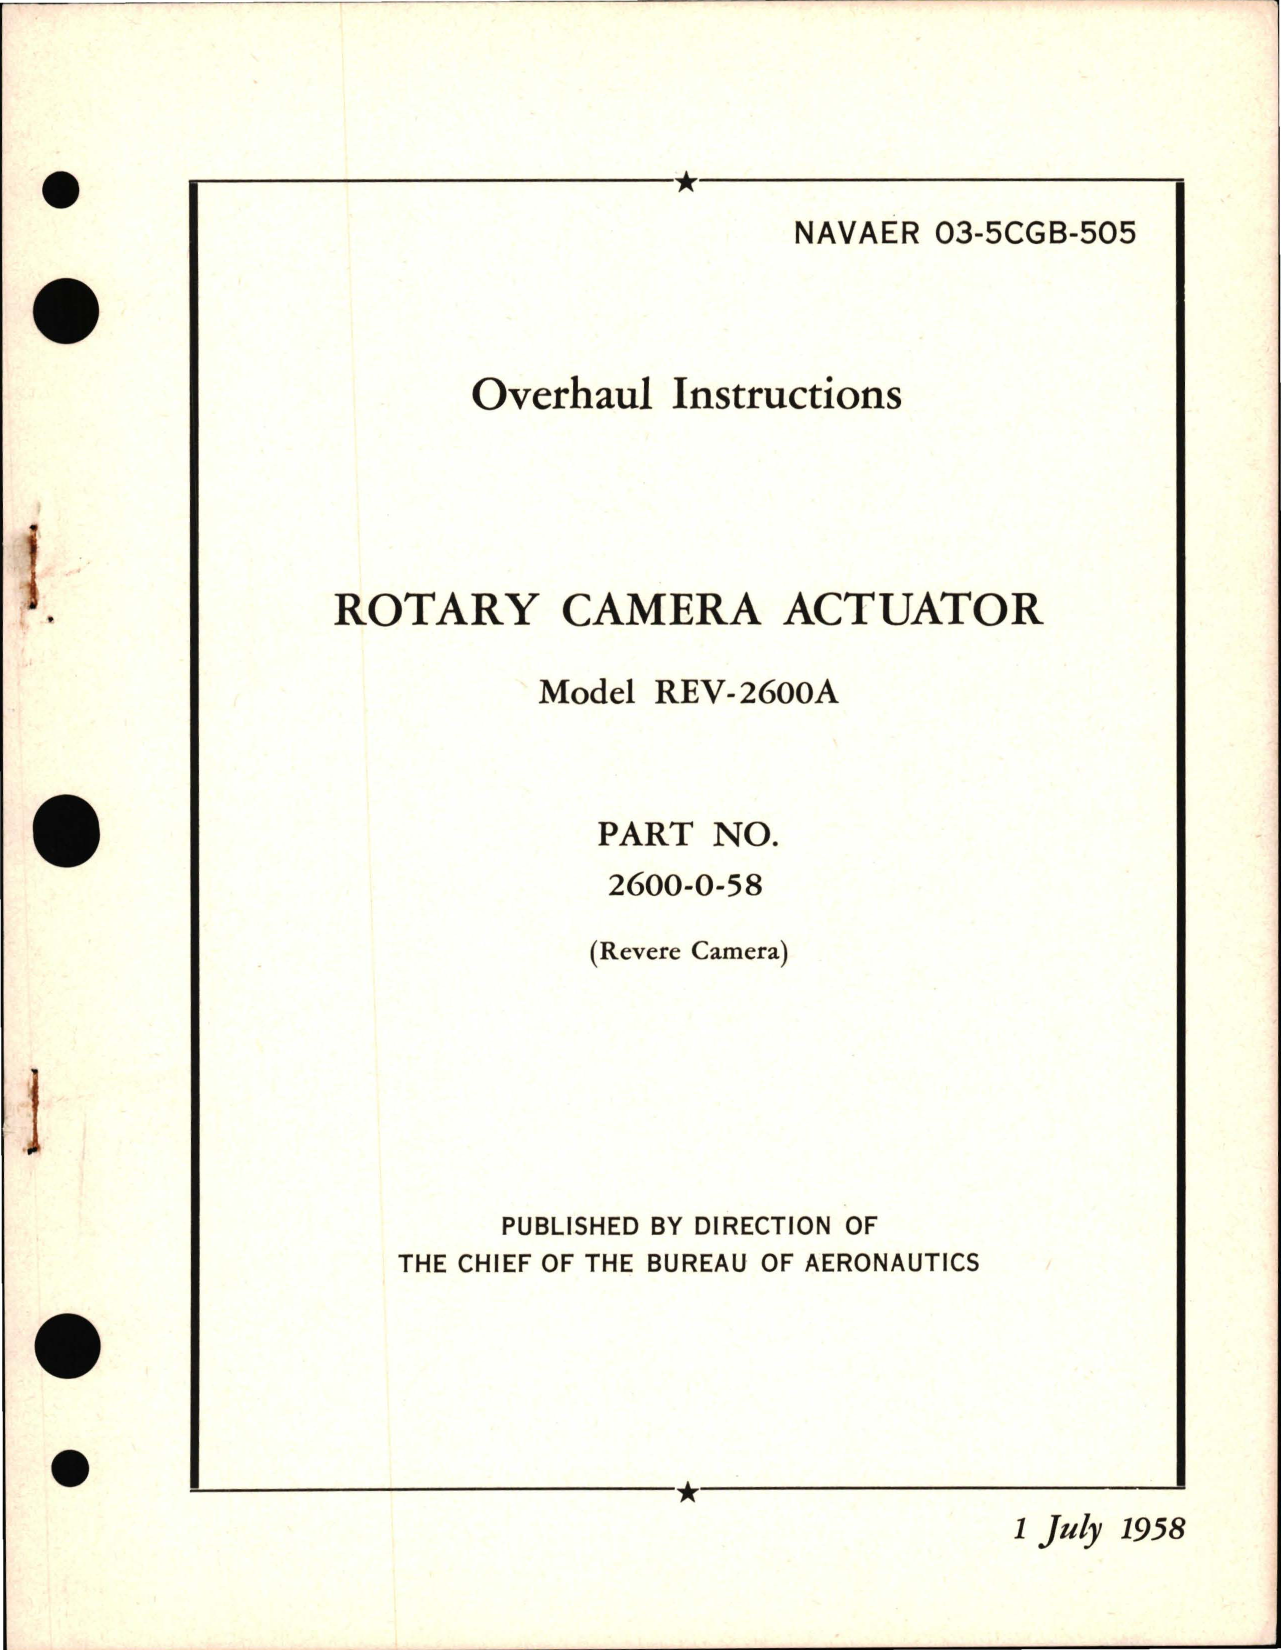 Sample page 1 from AirCorps Library document: Overhaul Instructions for Rotary Camera Actuator Model REV-2600A - Part 2600-0-58 